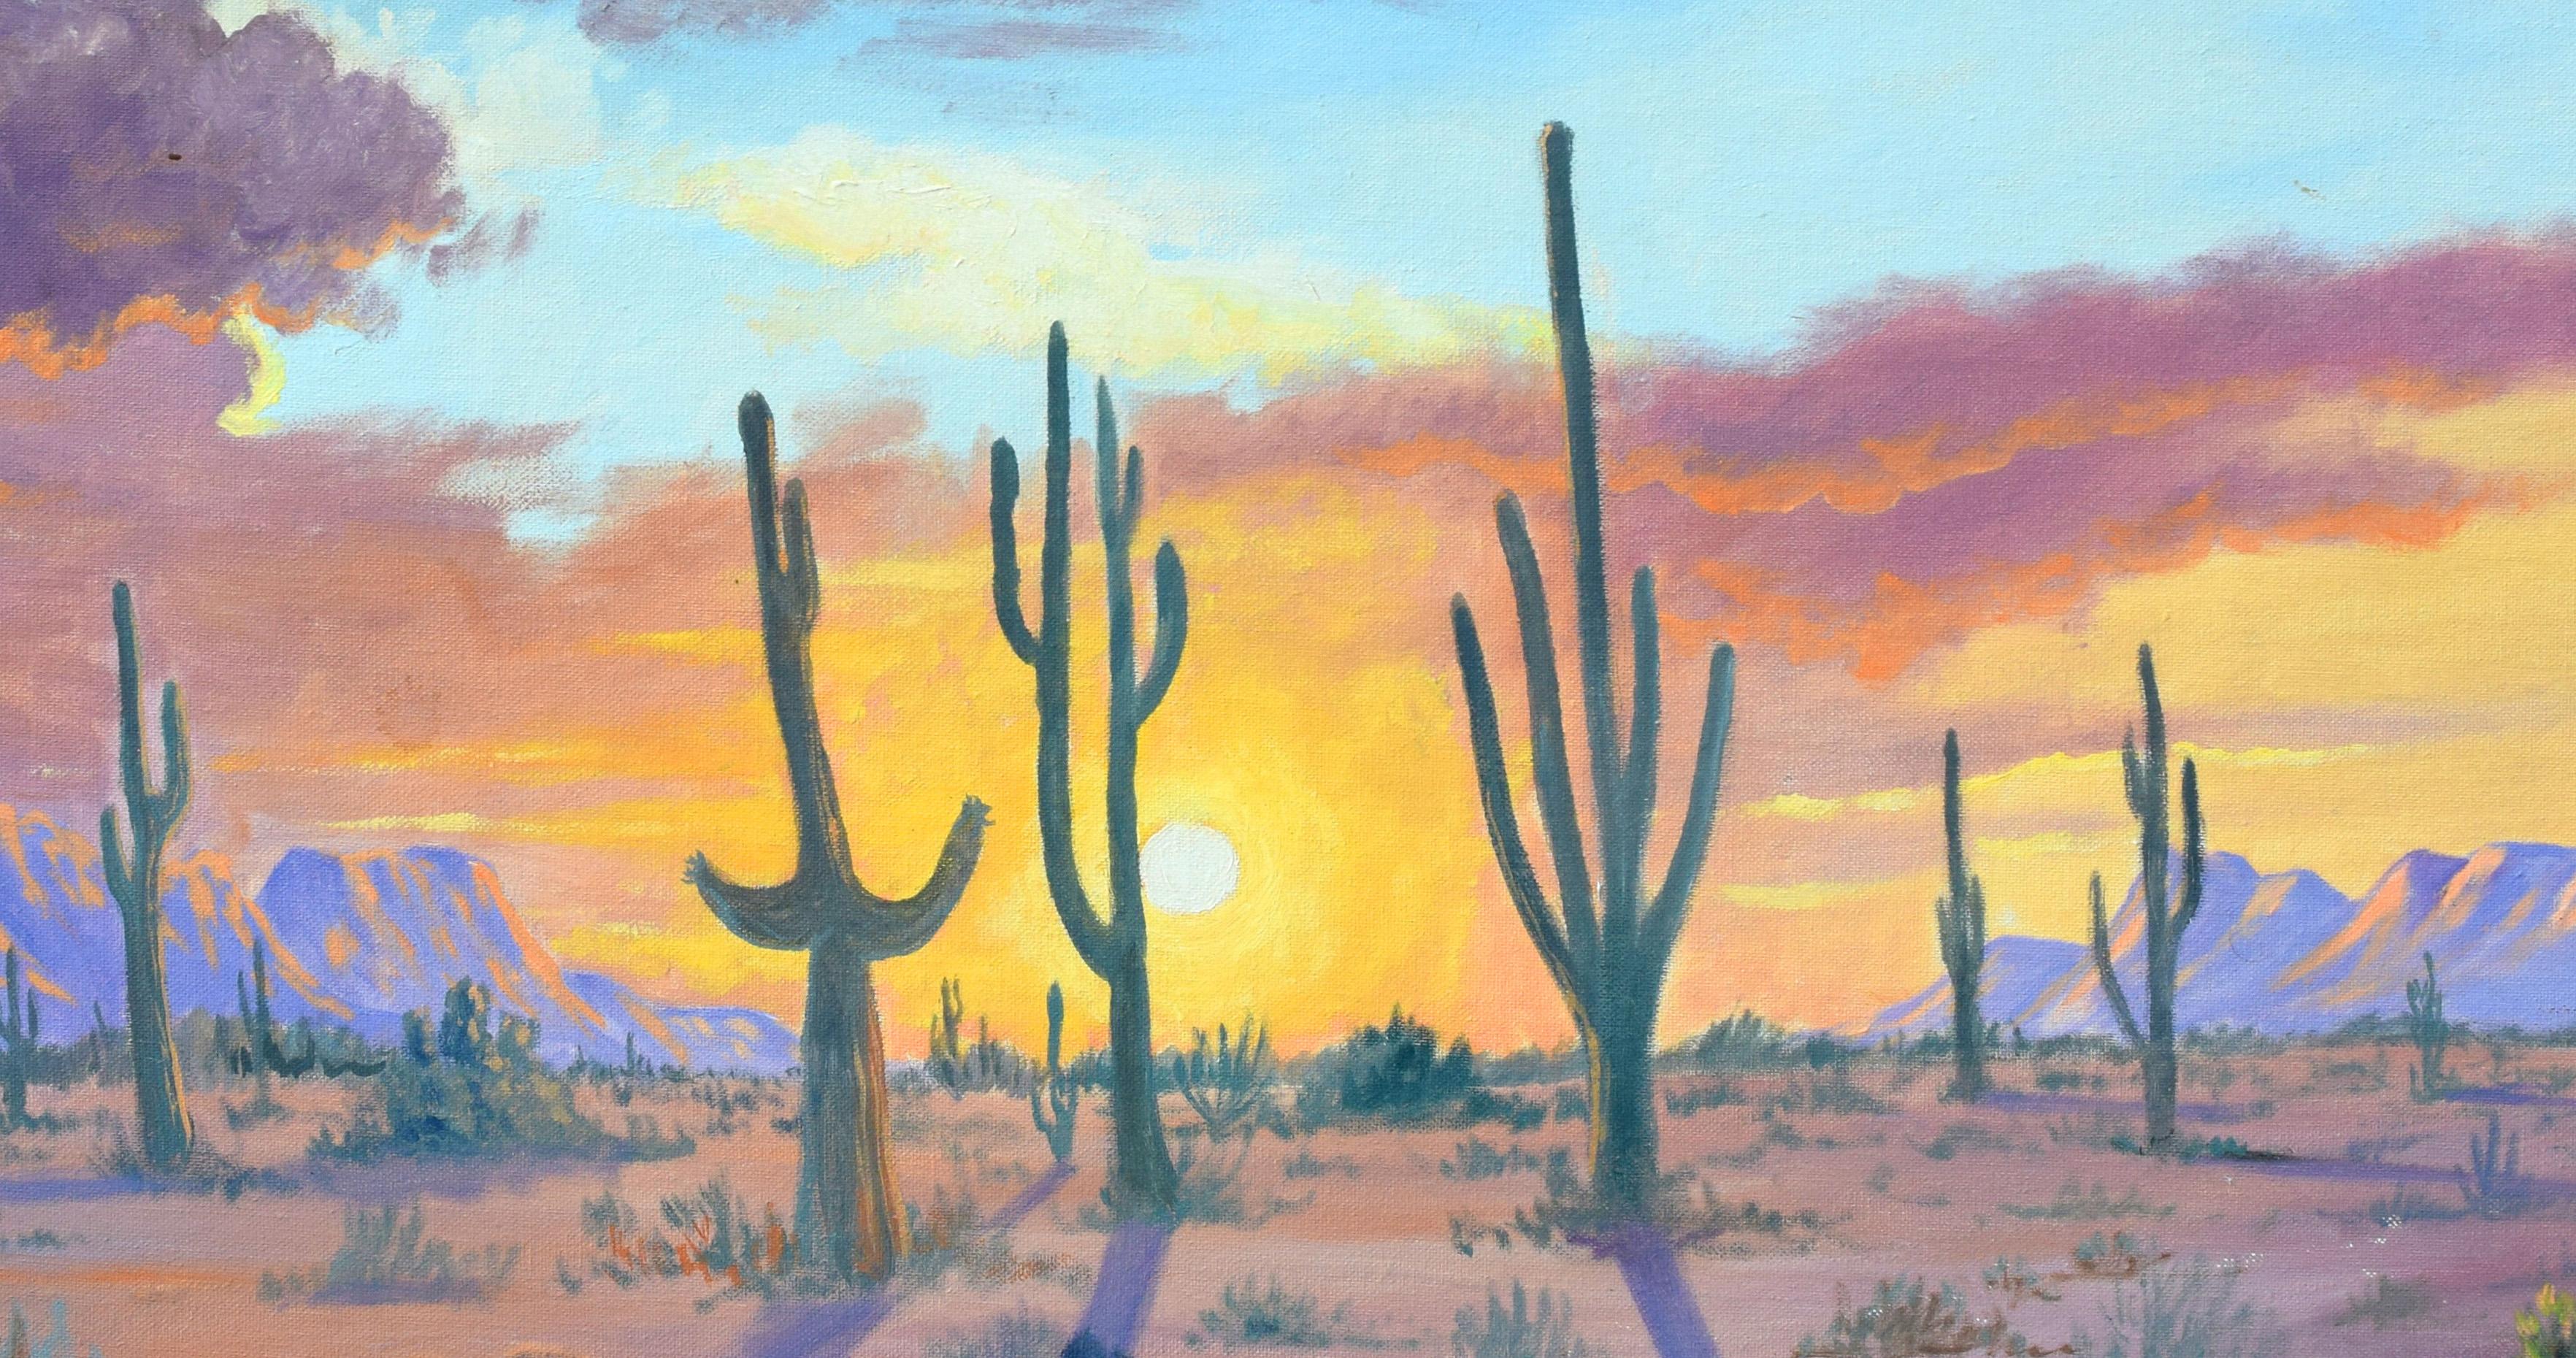 Mid Century Desert Cactus Sunset Landscape by Russell Dale Moffett 

Experience the splendor of the desert at sunset in this stunning mid century landscape by Russell Dale Moffett (American, 1899-1984). This striking 1959 landscape features tall